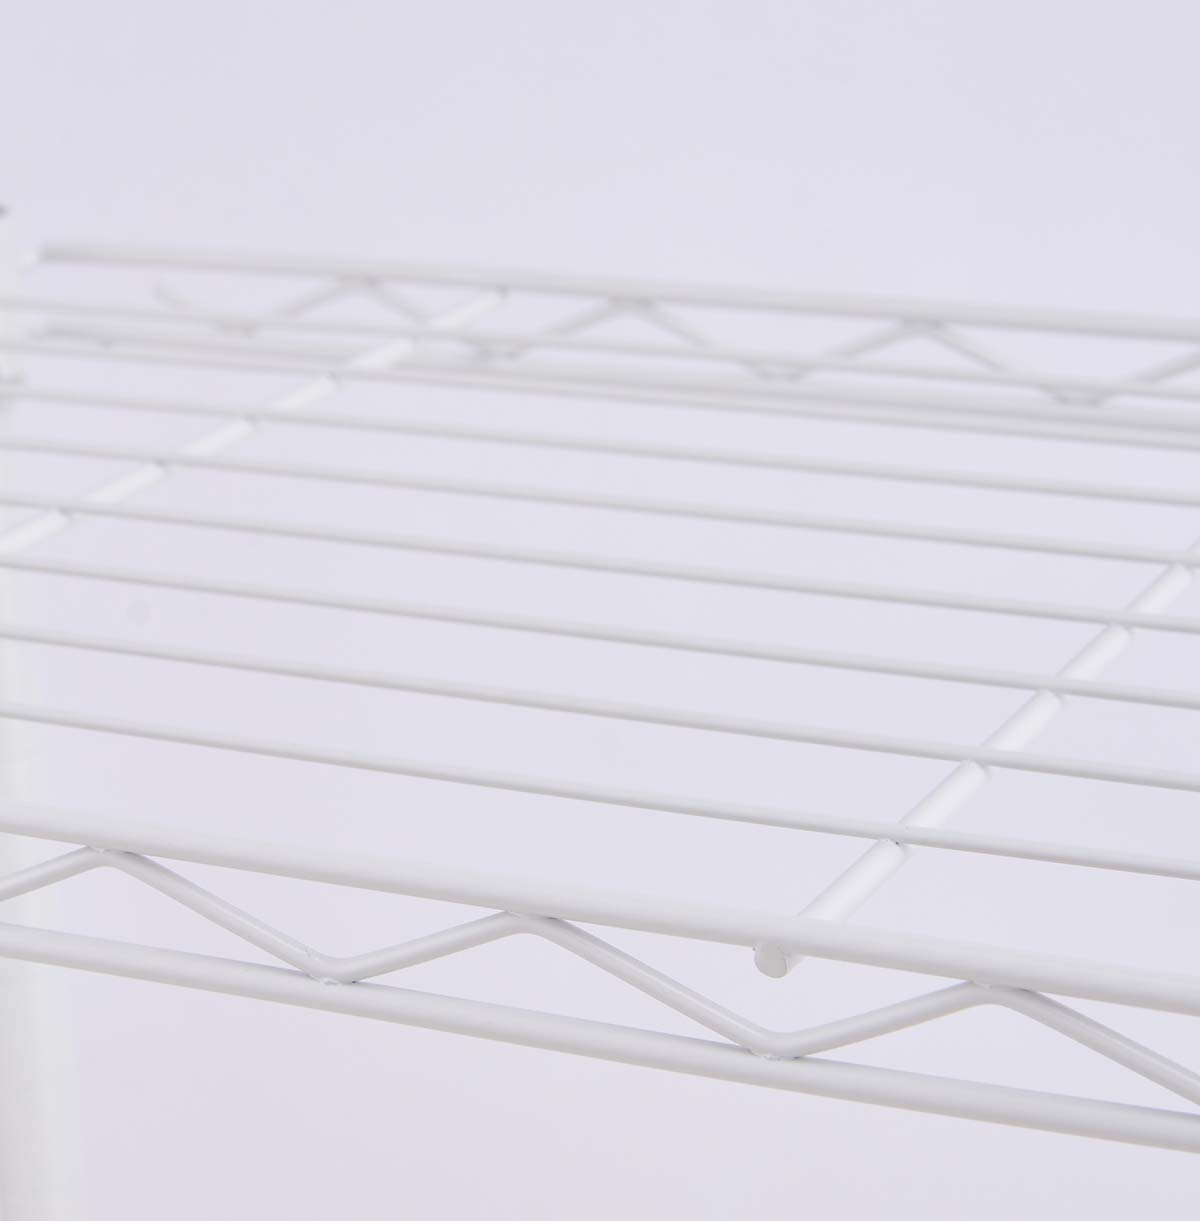 4-Tier Wire Pantry Shelving Unit / Storage Shelving Unit White / Boltless Shelving Steel Shelf / Wire Shelving Unit 30 Inches Wide